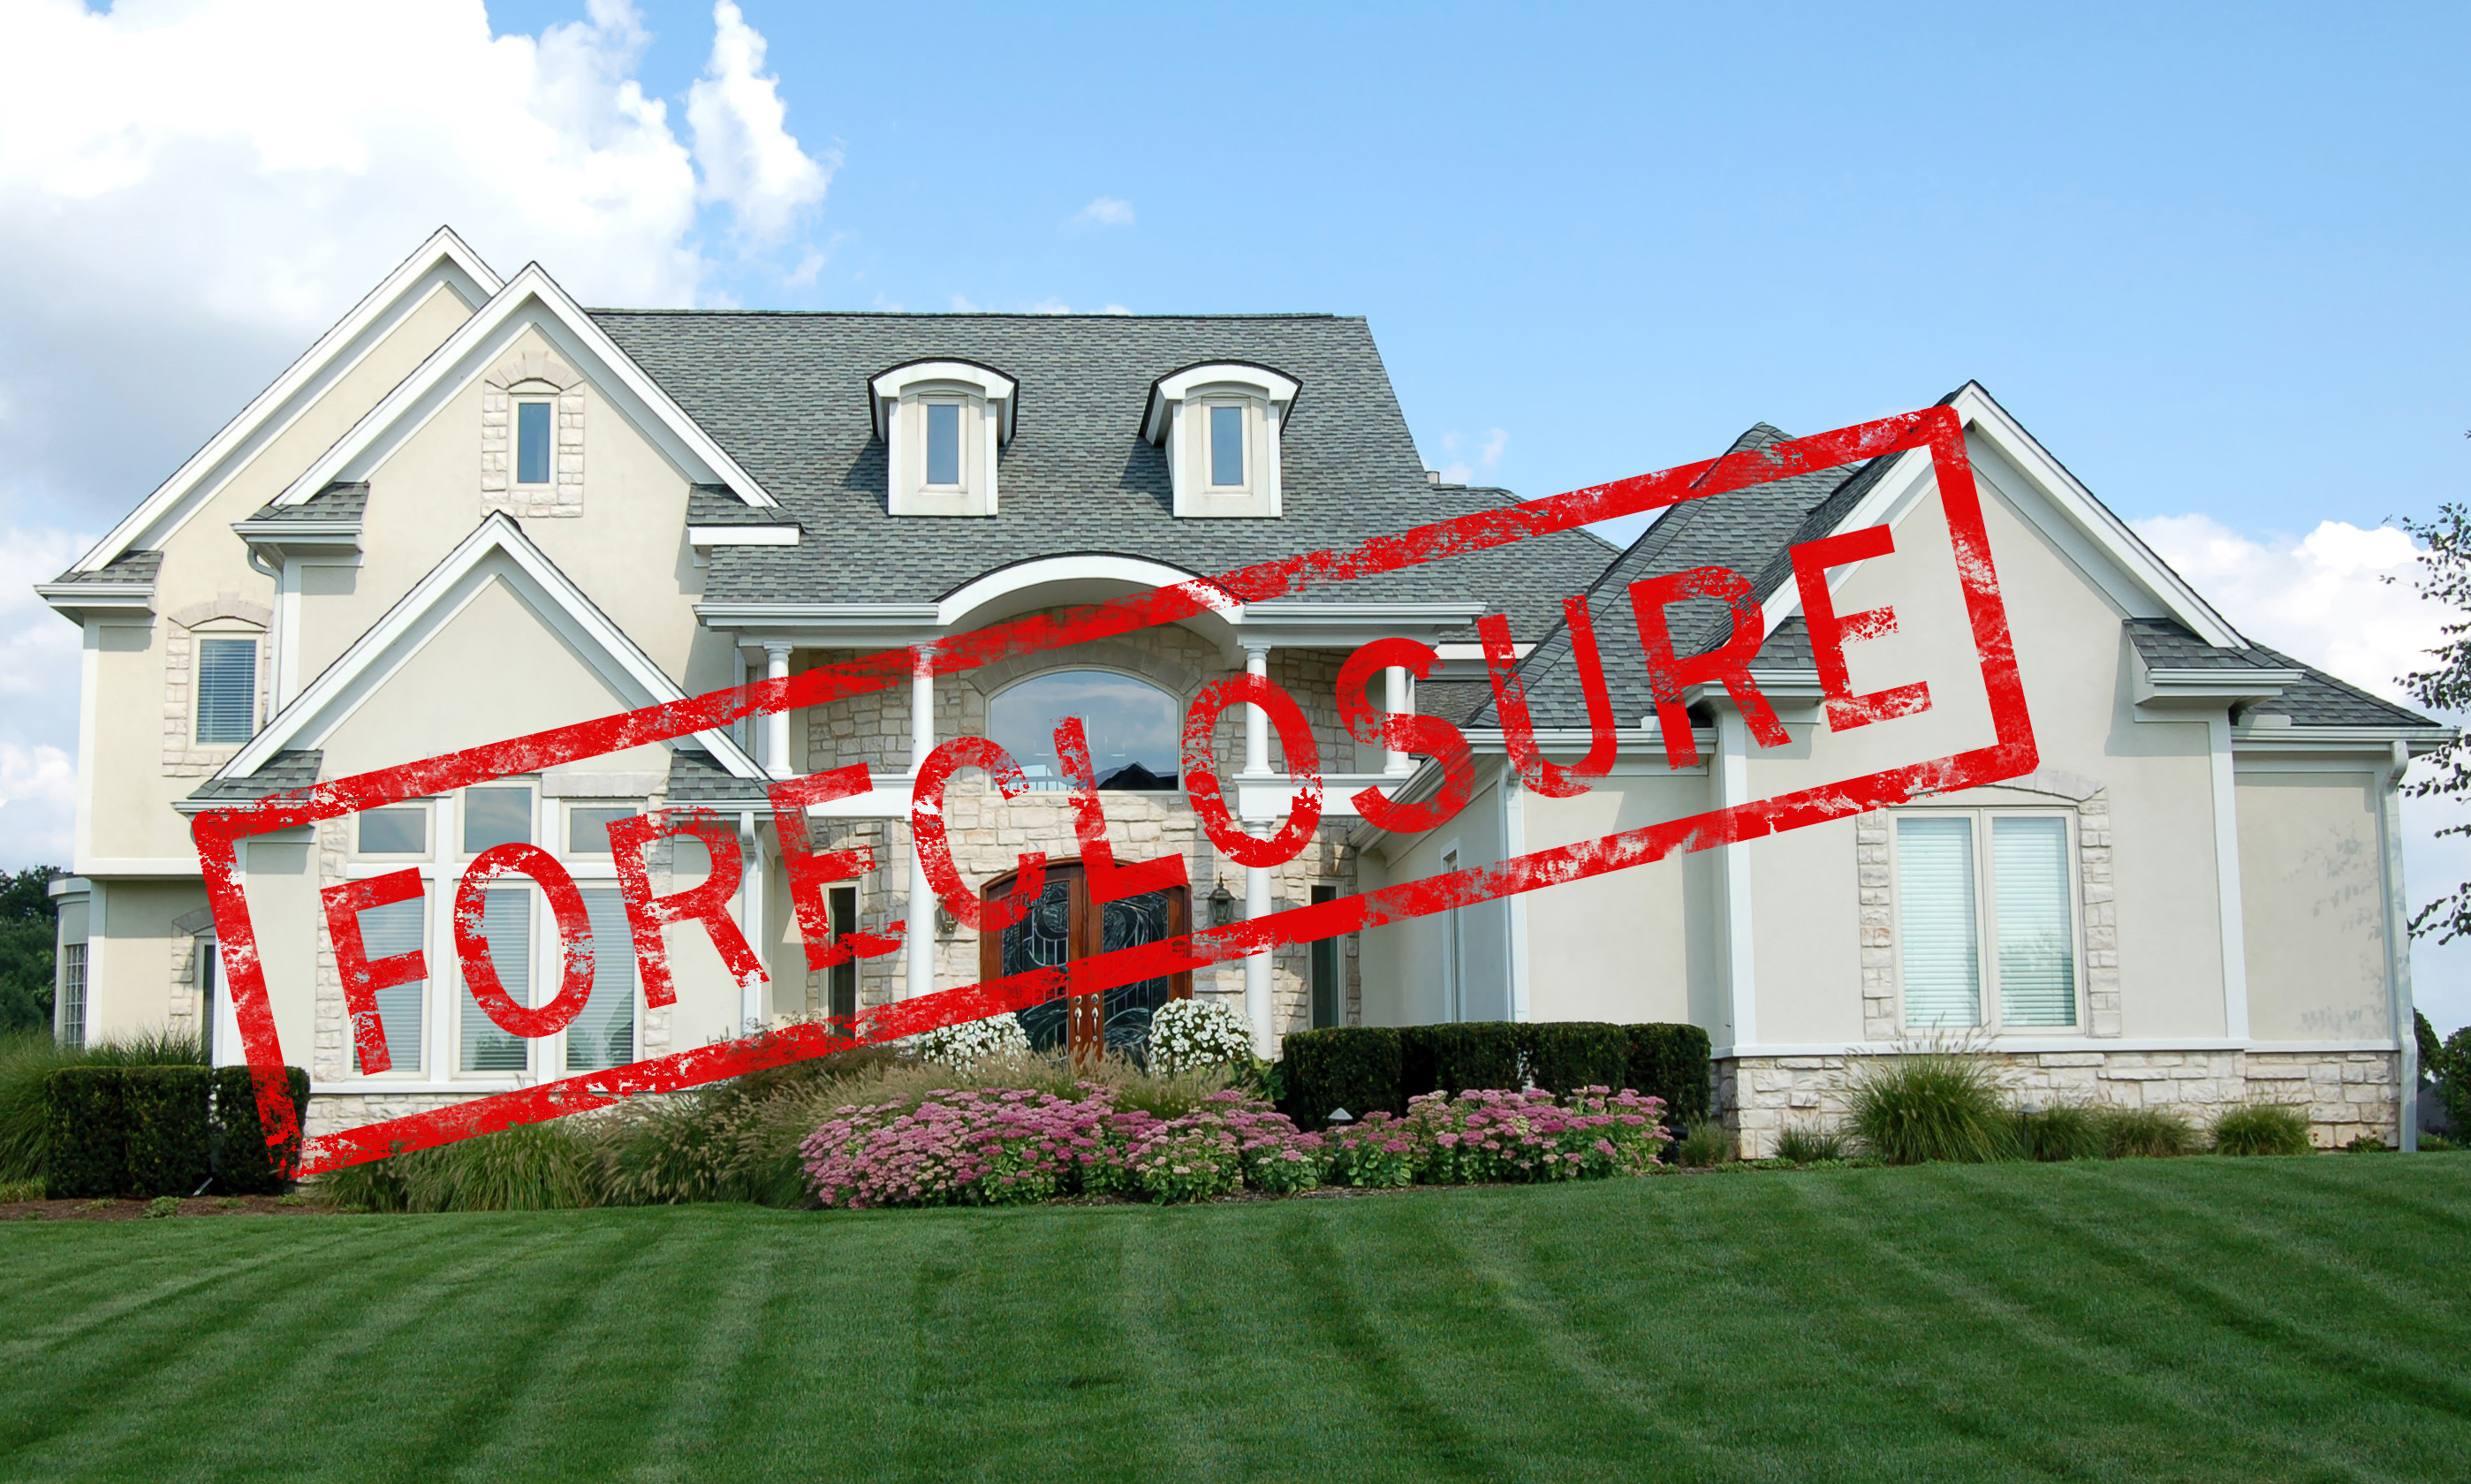 Call Savery Appraisal Services Inc. to discuss appraisals for Tulare foreclosures